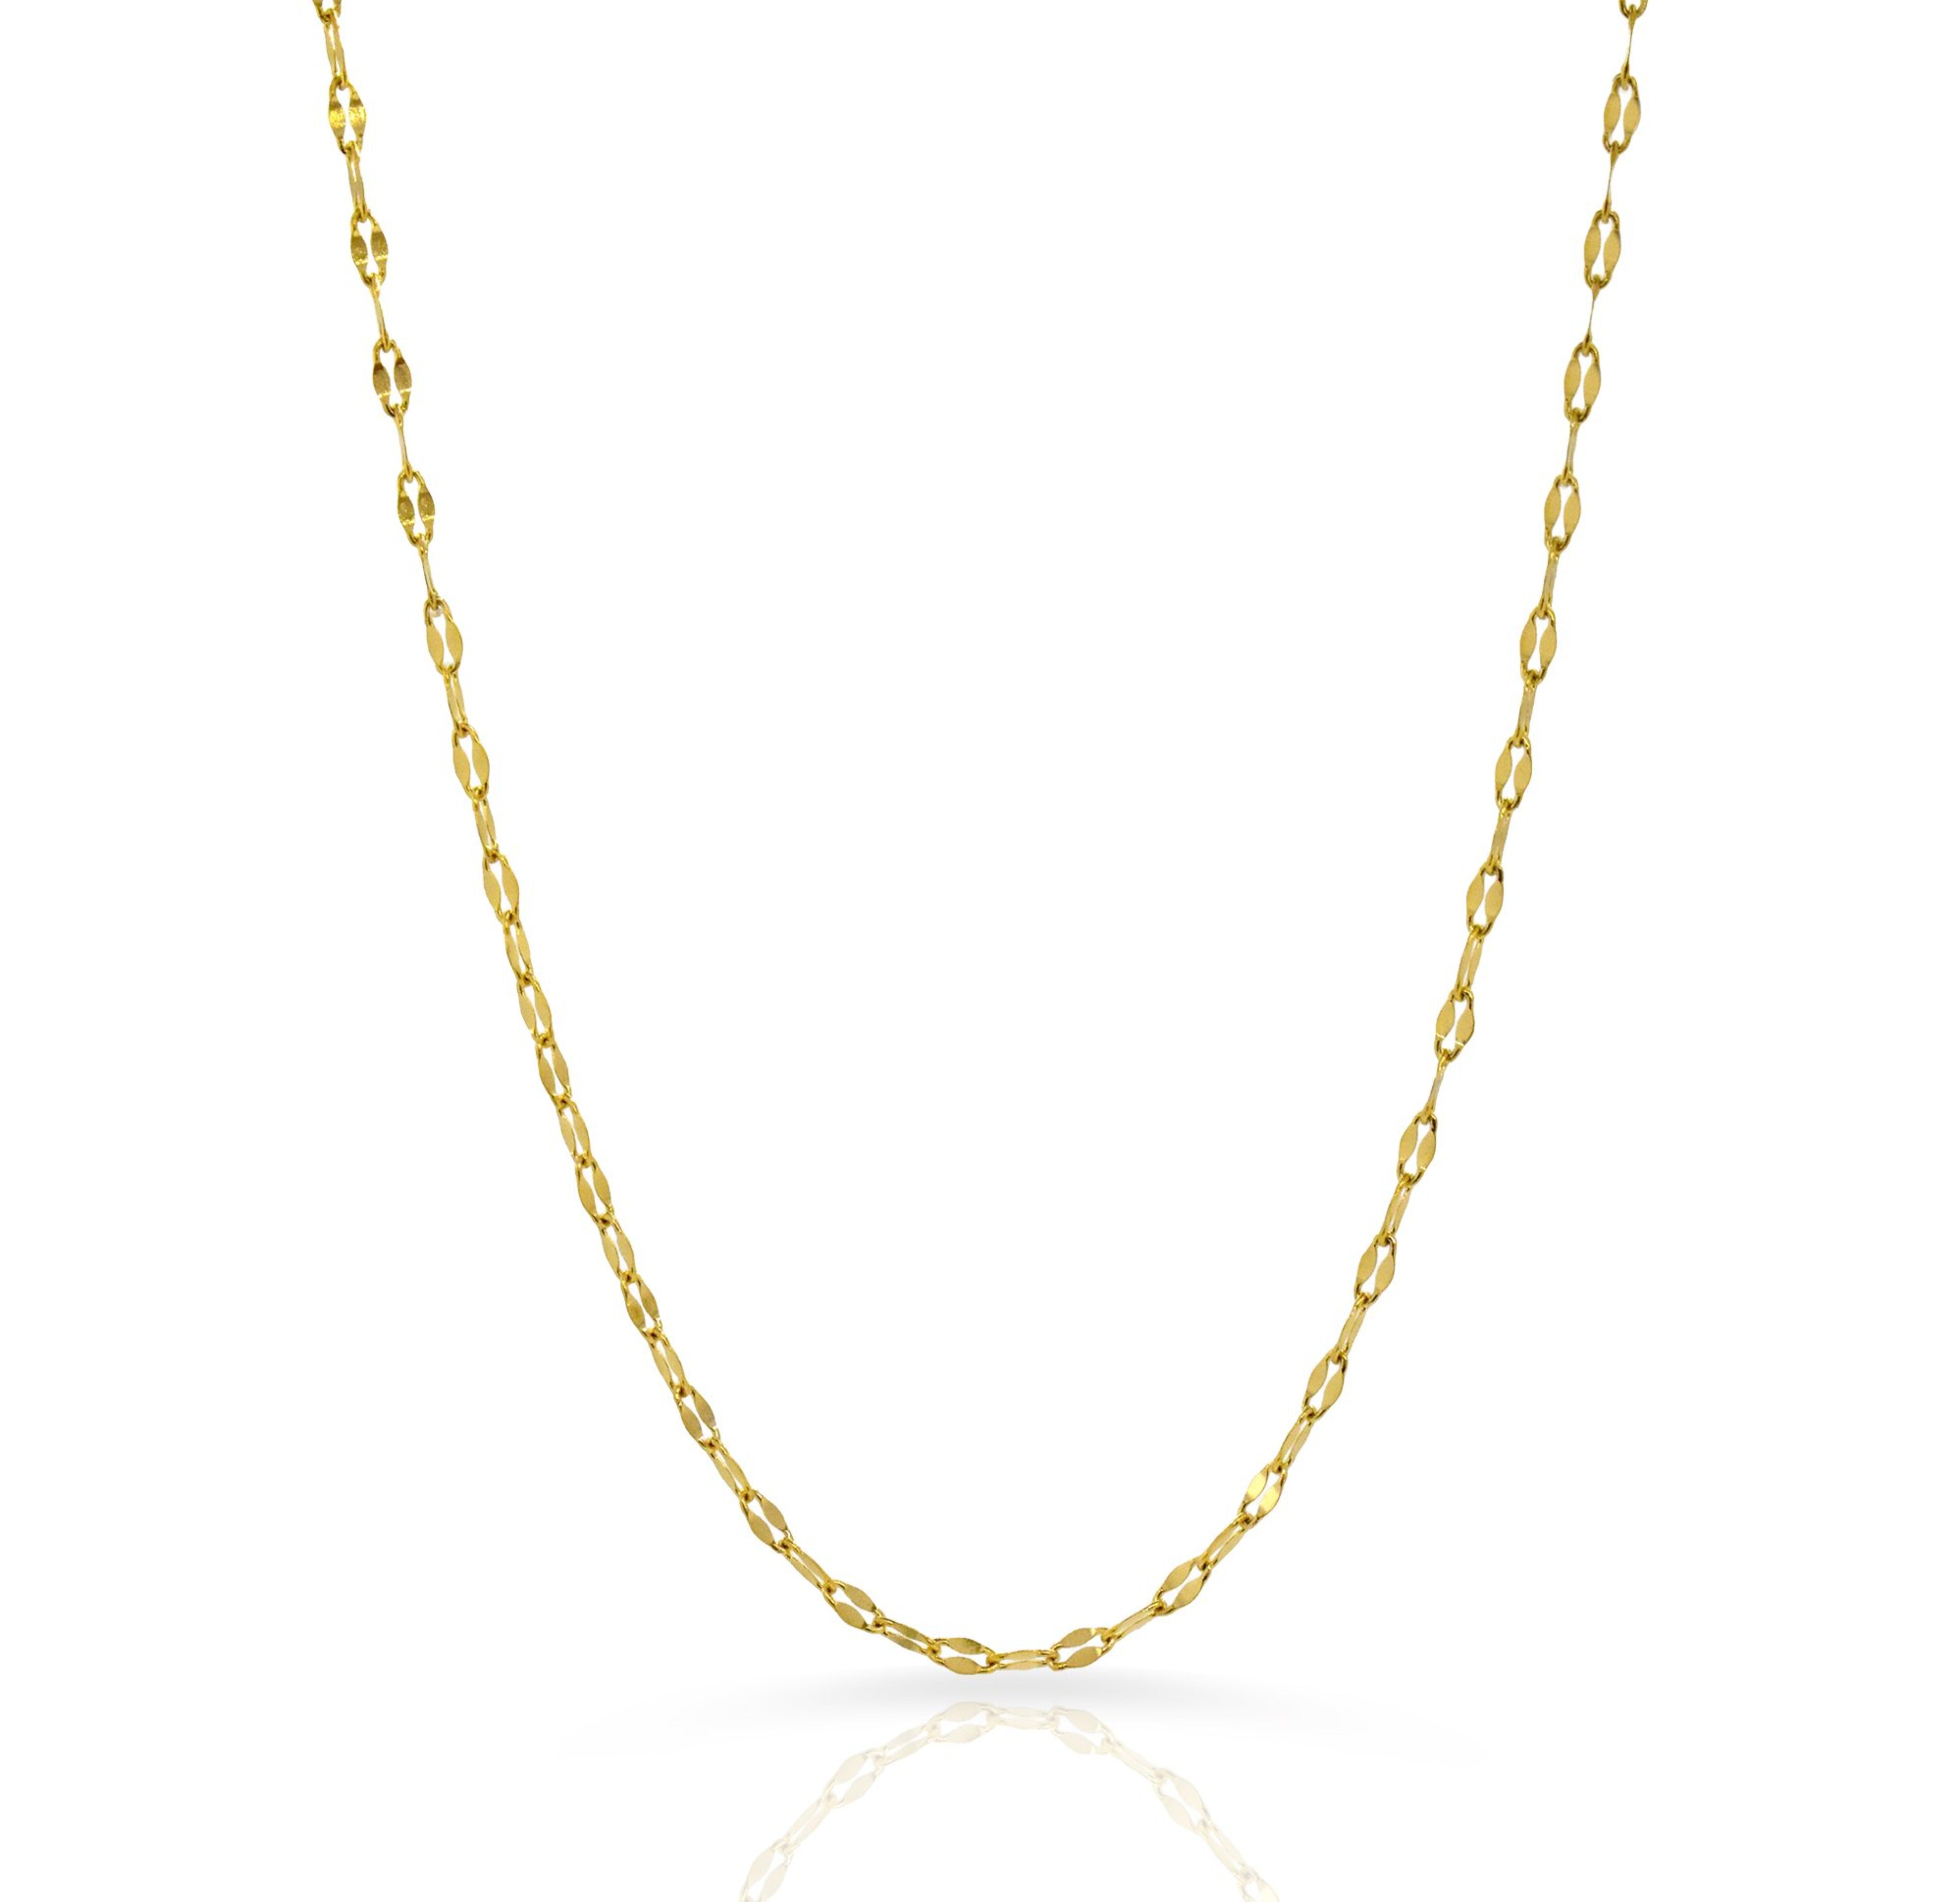 ELSIE GOLD DAINTY LACE CHAIN NECKLACE - SAMPLE